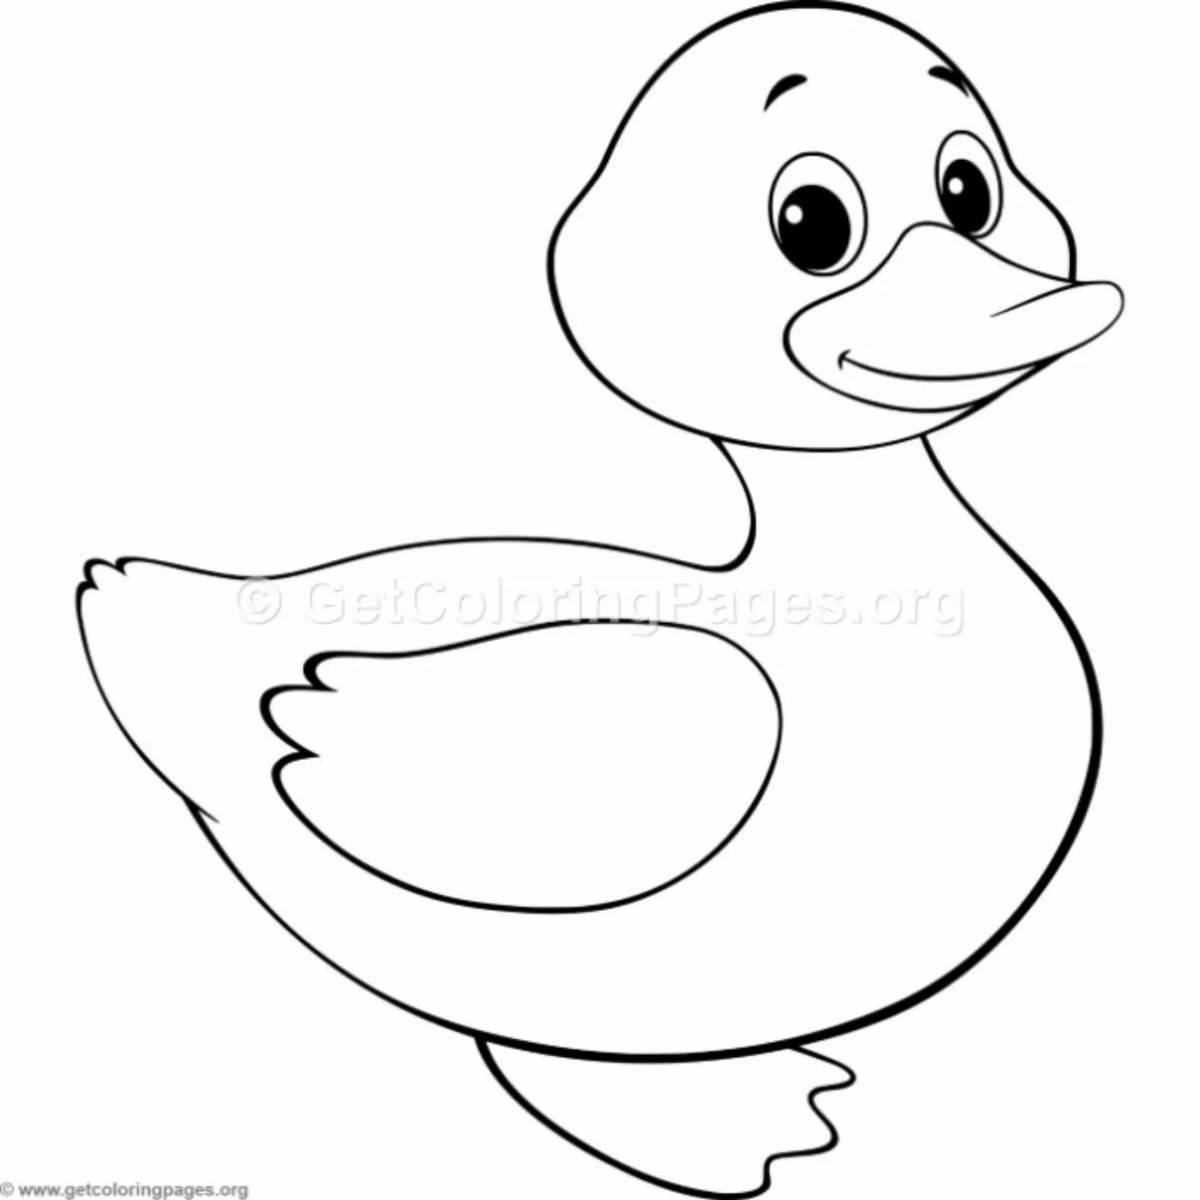 Cute Dymkovo duck coloring book for little kids